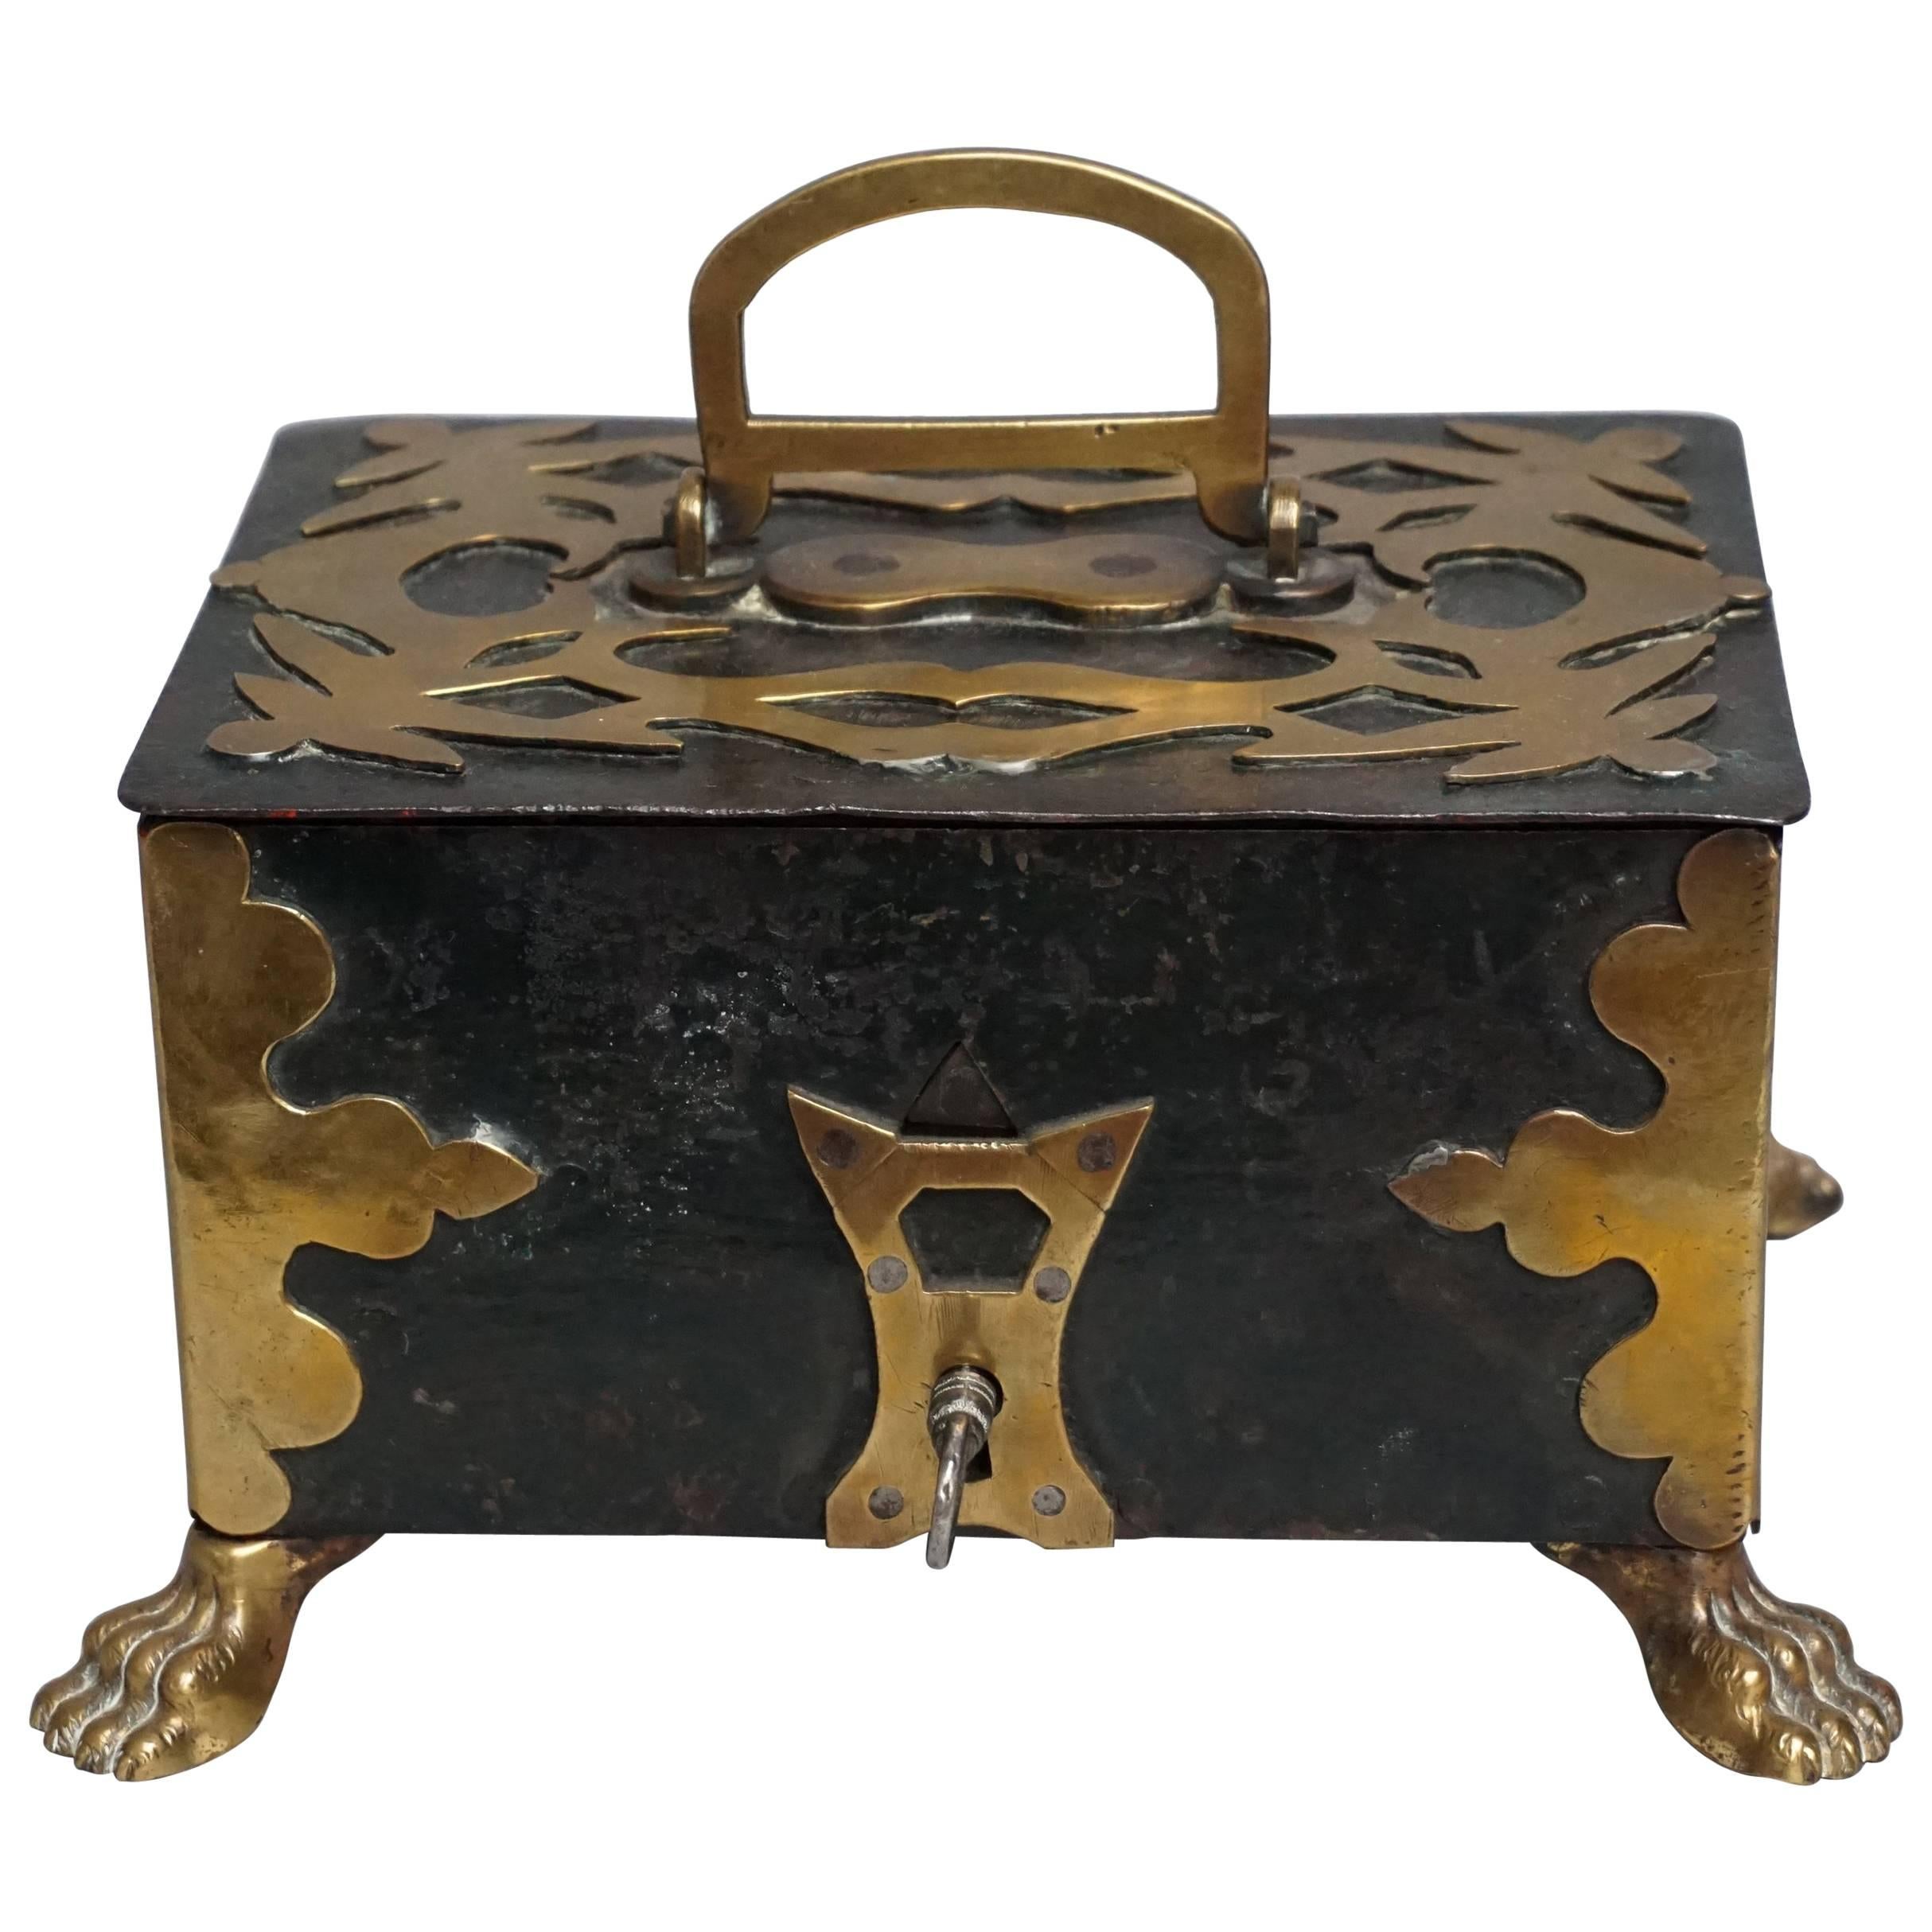 18th Century Brass and Iron Money Box, Little Strongbox or Treasure Chest